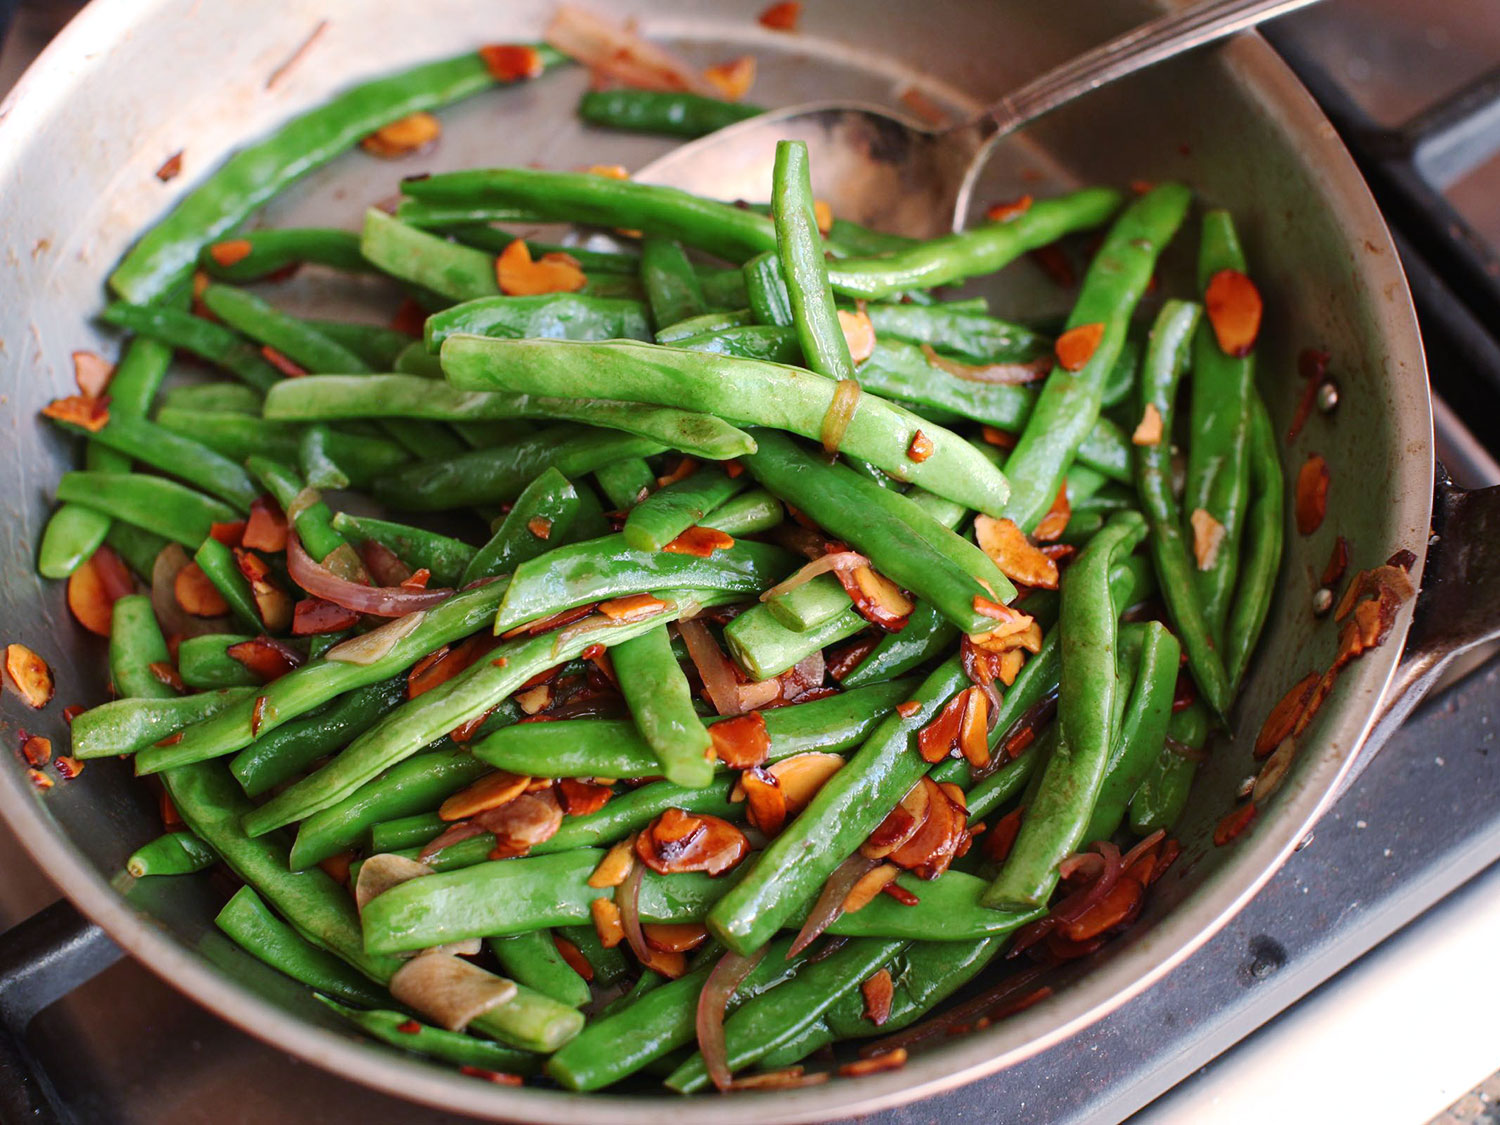 Haricots Verts Amandine (French-Style Green Beans With Almonds)